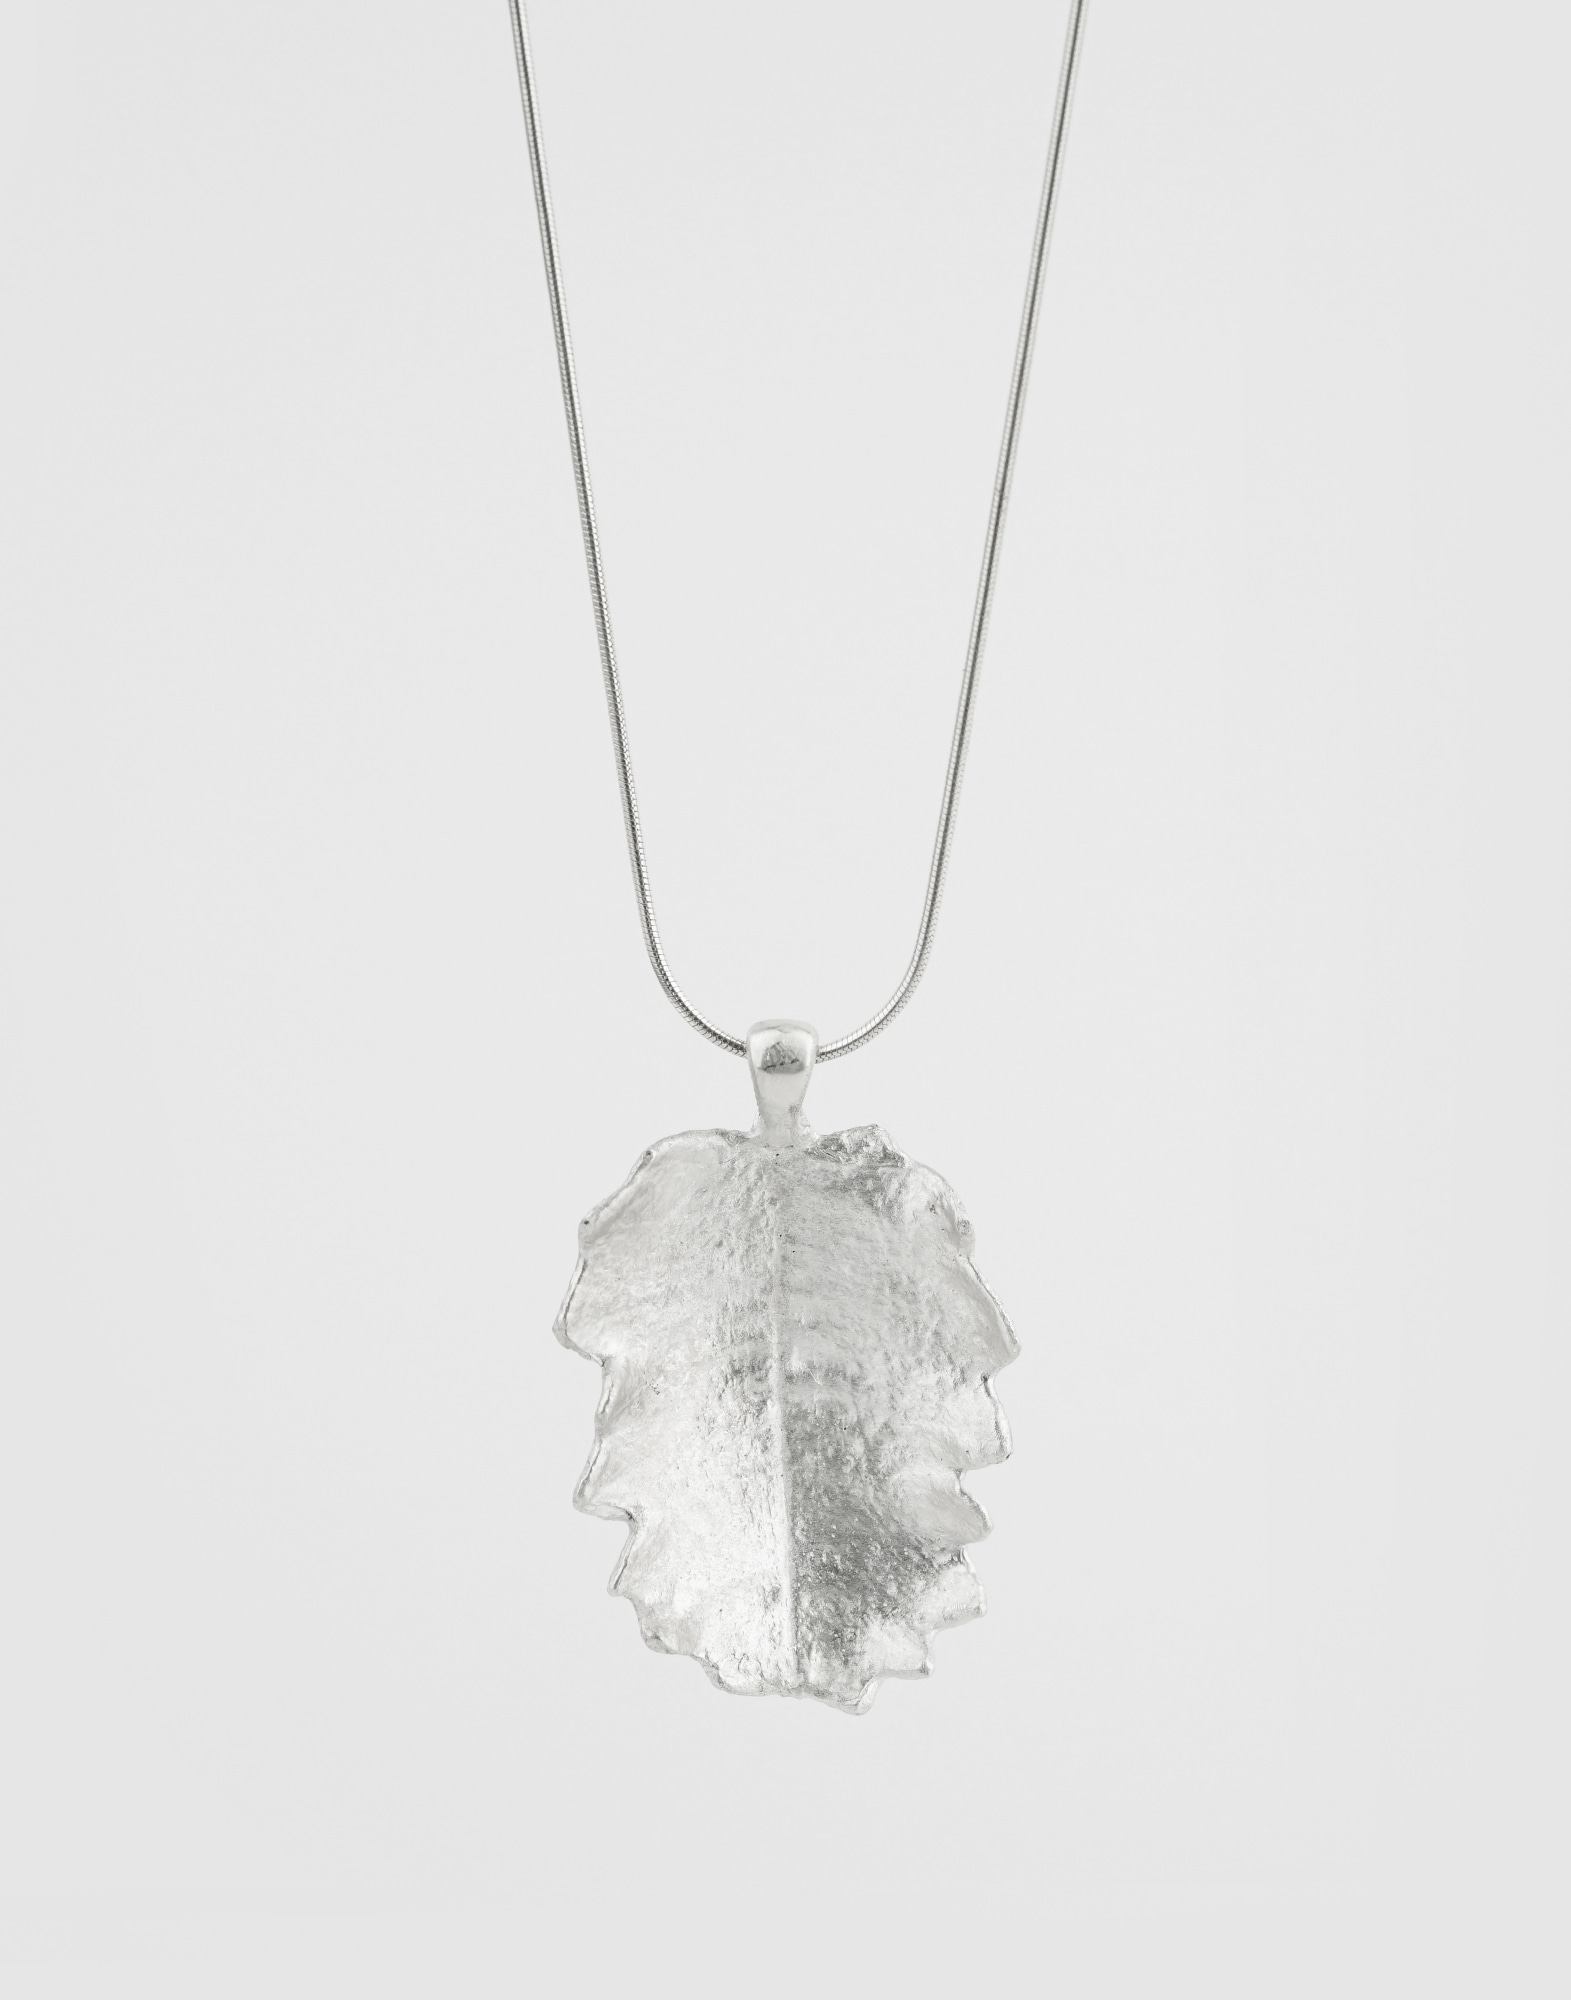 Leaf necklace (long chain)